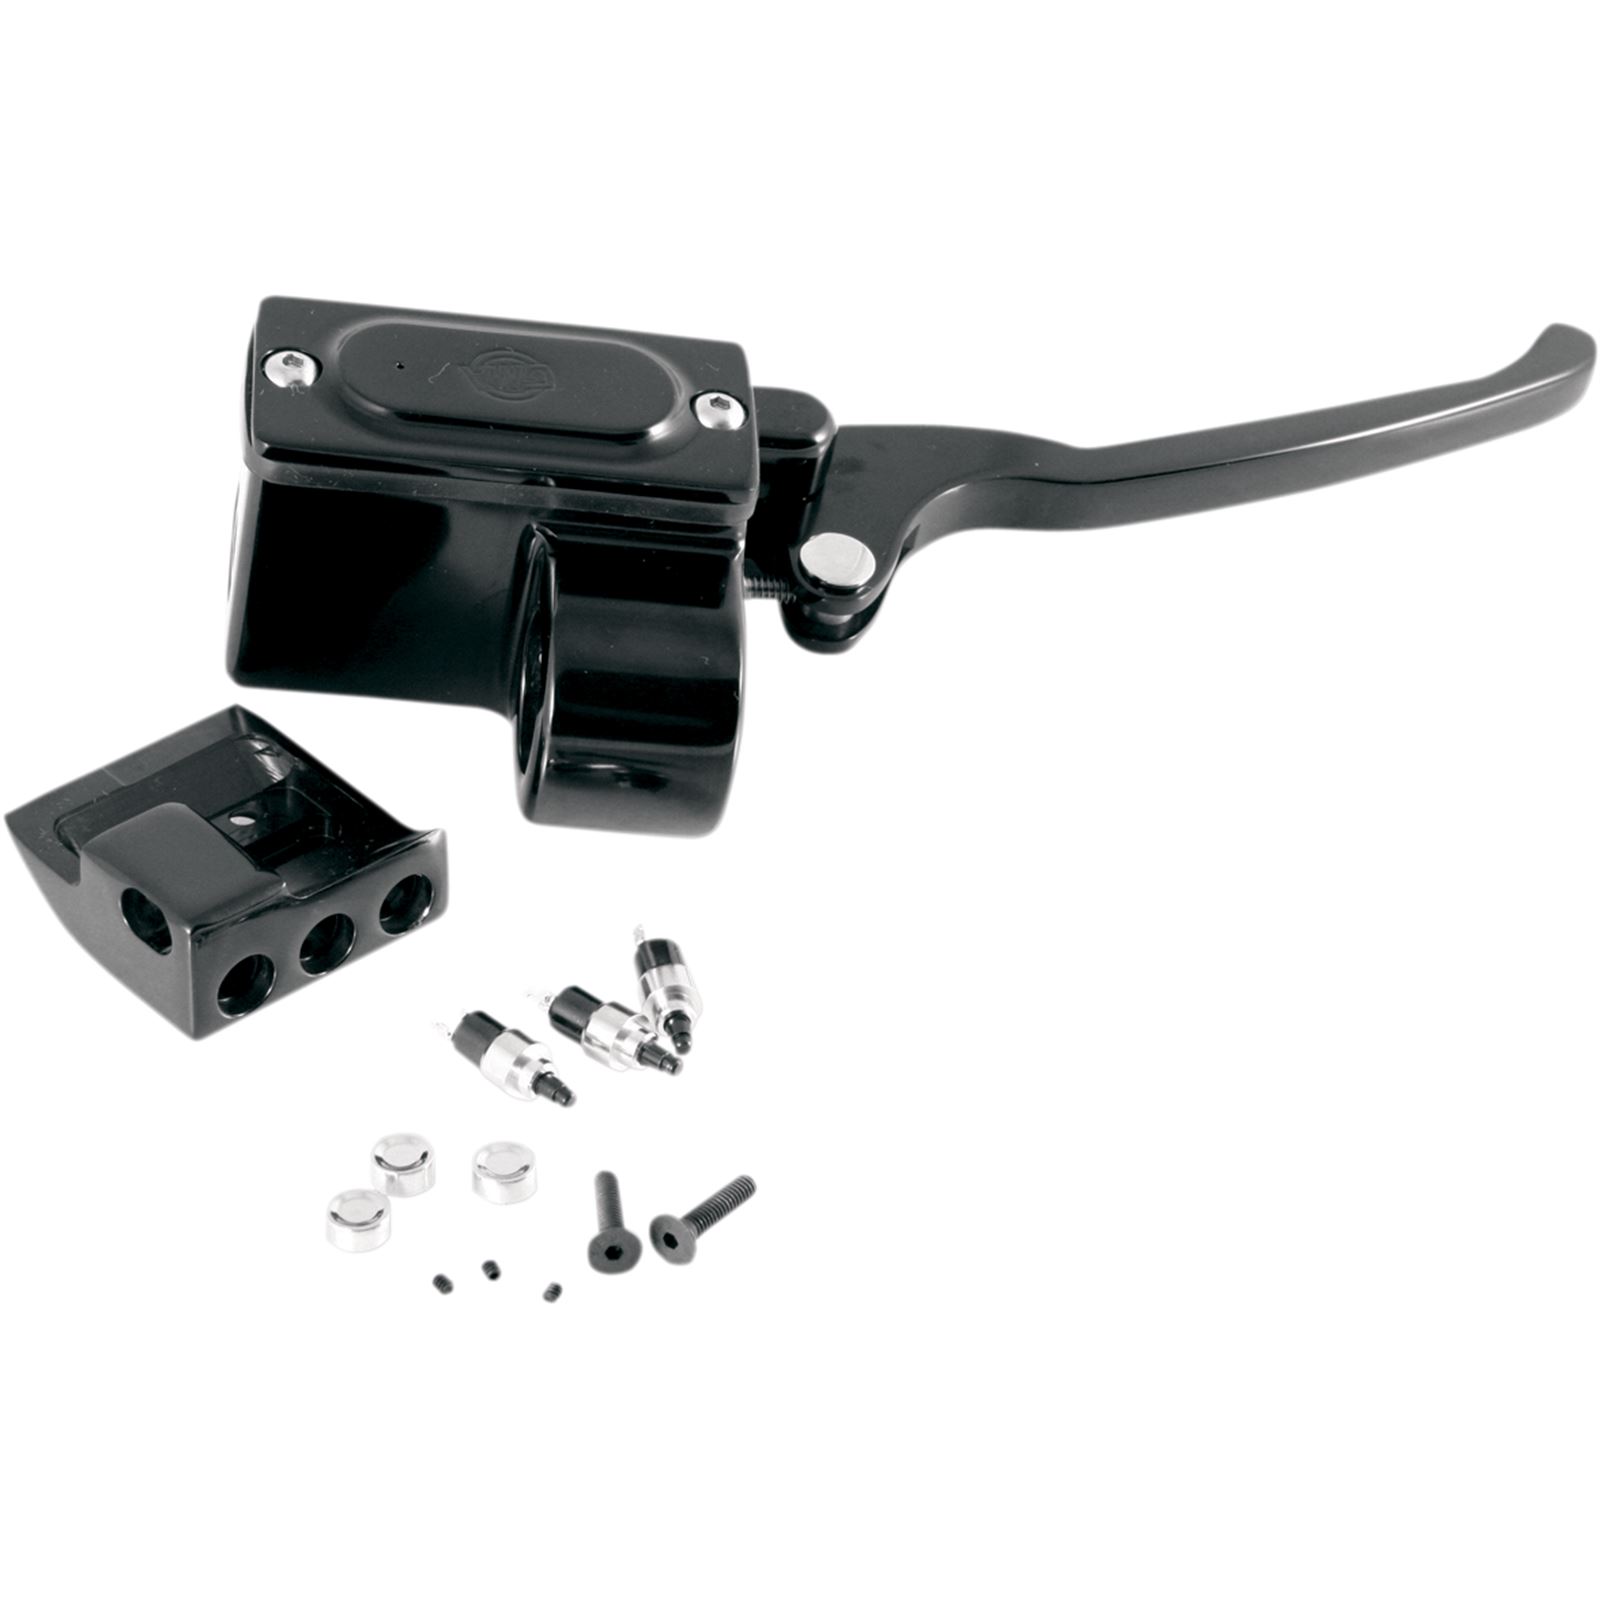 GMA Engineering Black 5/8" Master Cylinder Assembly with  Switch